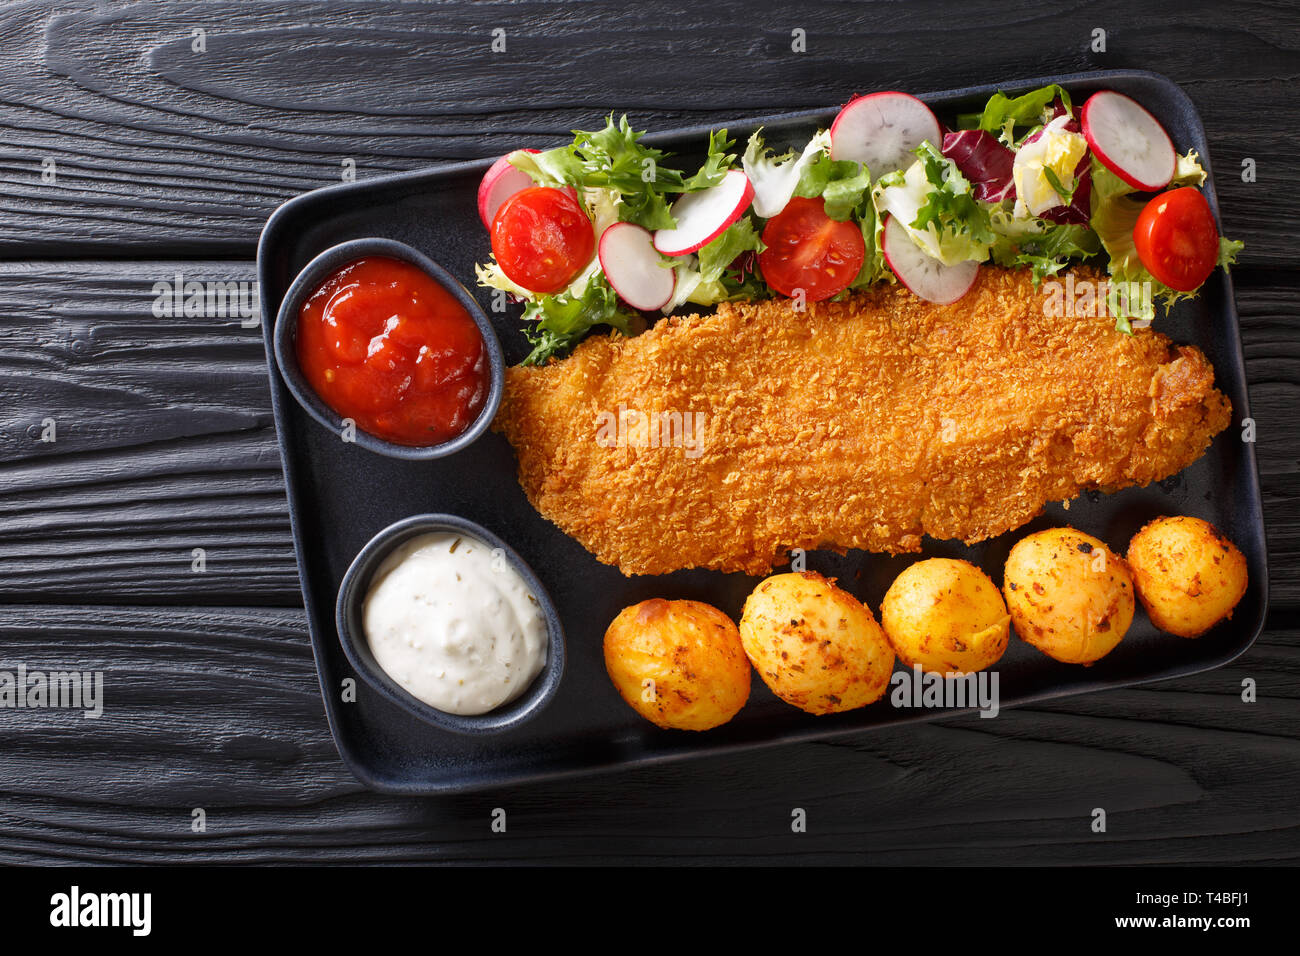 main course of cod fillet in breading with a garnish of new potatoes and fresh vegetable salad close-up on a plate on the table. Horizontal top view f Stock Photo